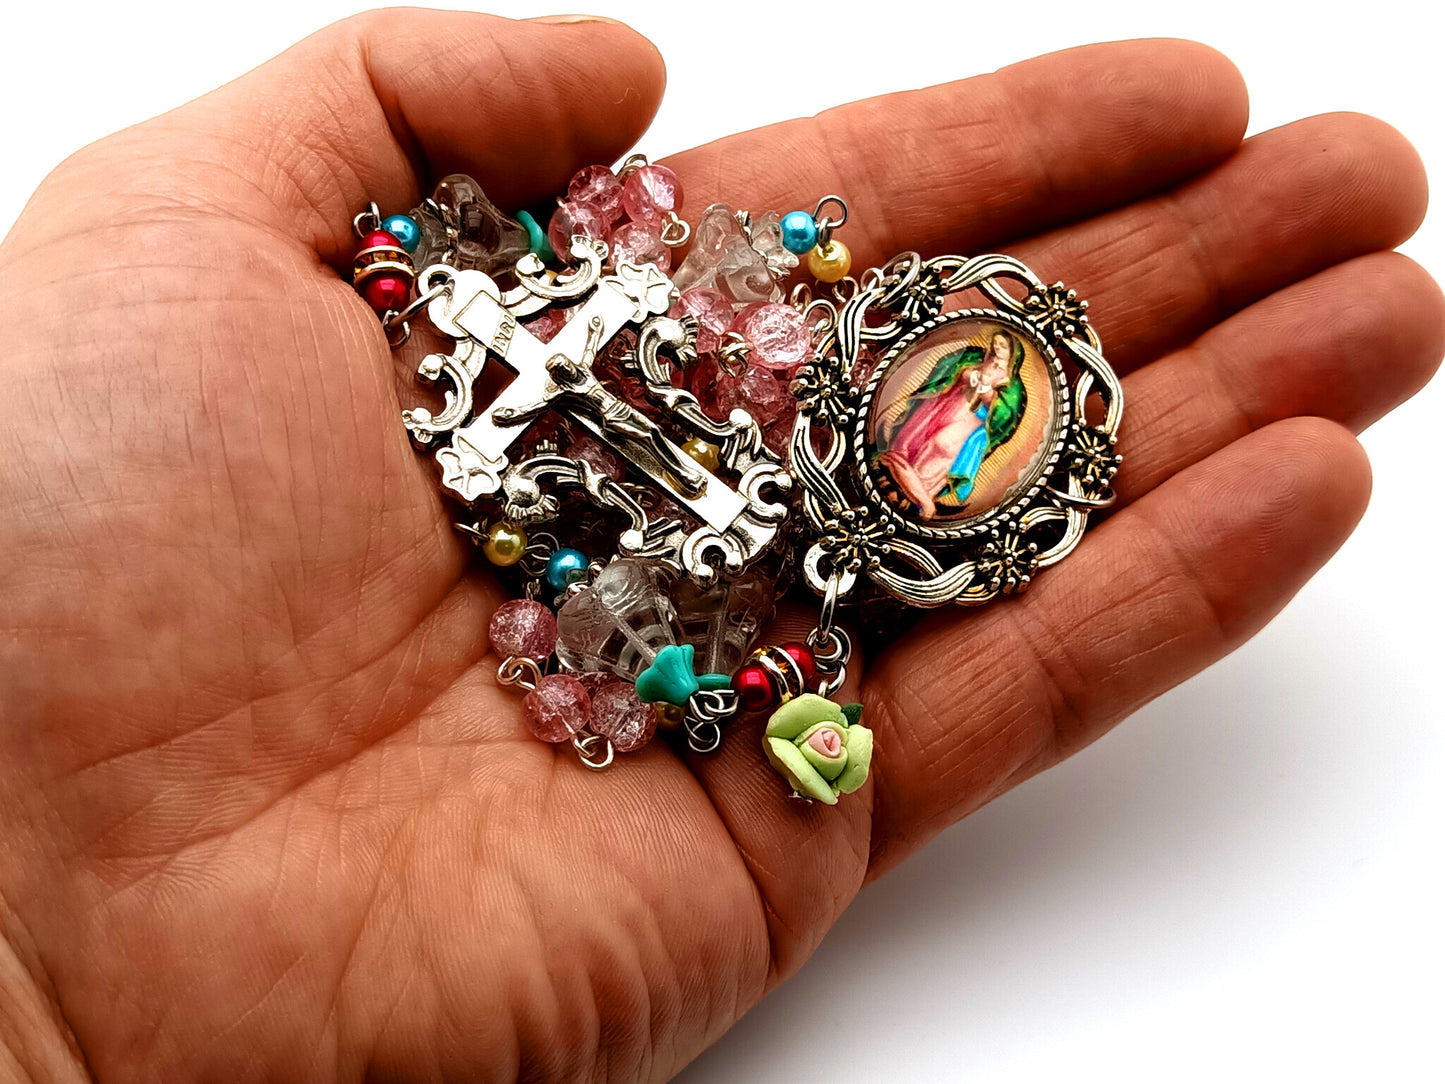 Our Lady of Guadalupe unique rosary beads with crackled glass and flower petal rosary beads and filigree crucifix and floral silver medal frame.